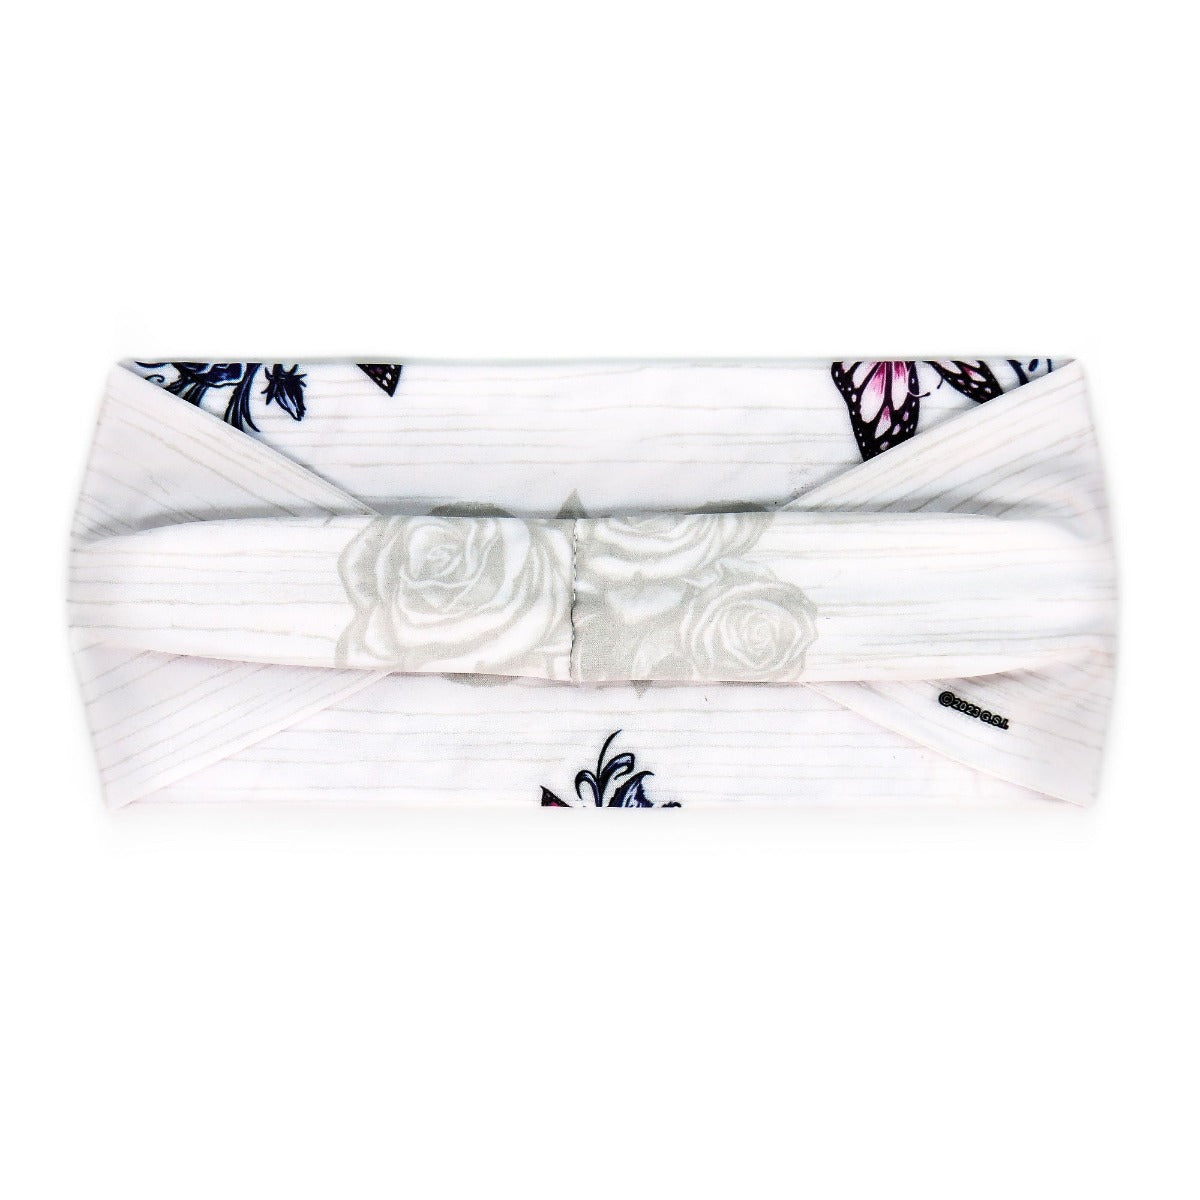 A Hot Leathers Heart Lock Bandana Headband Wrap w/Rhinestones, White adorned with delicate flowers, exuding an elegant and feminine touch.